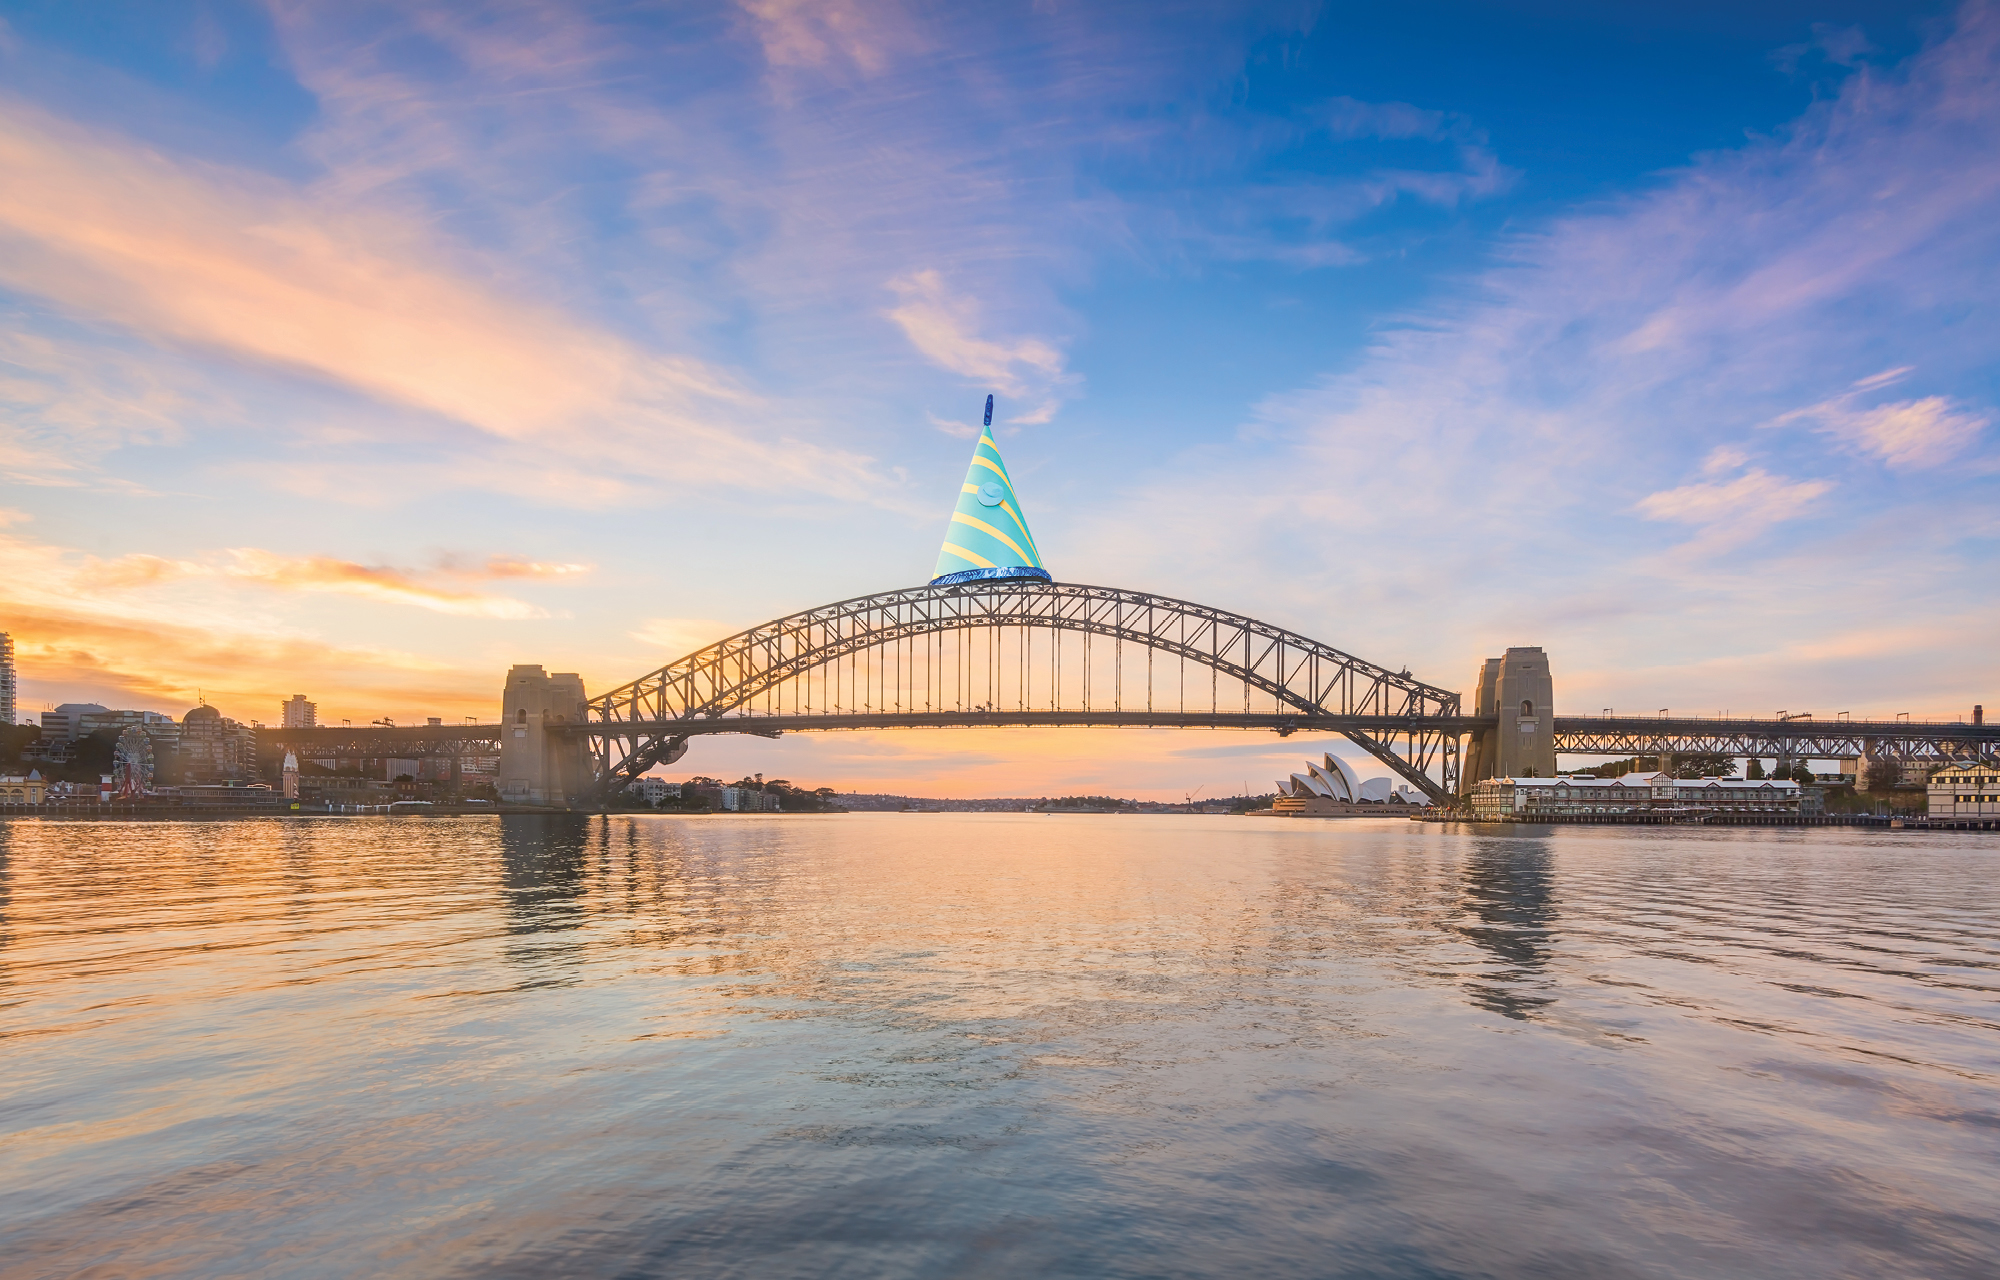 Bridgeclimb Sydney romance packages and products